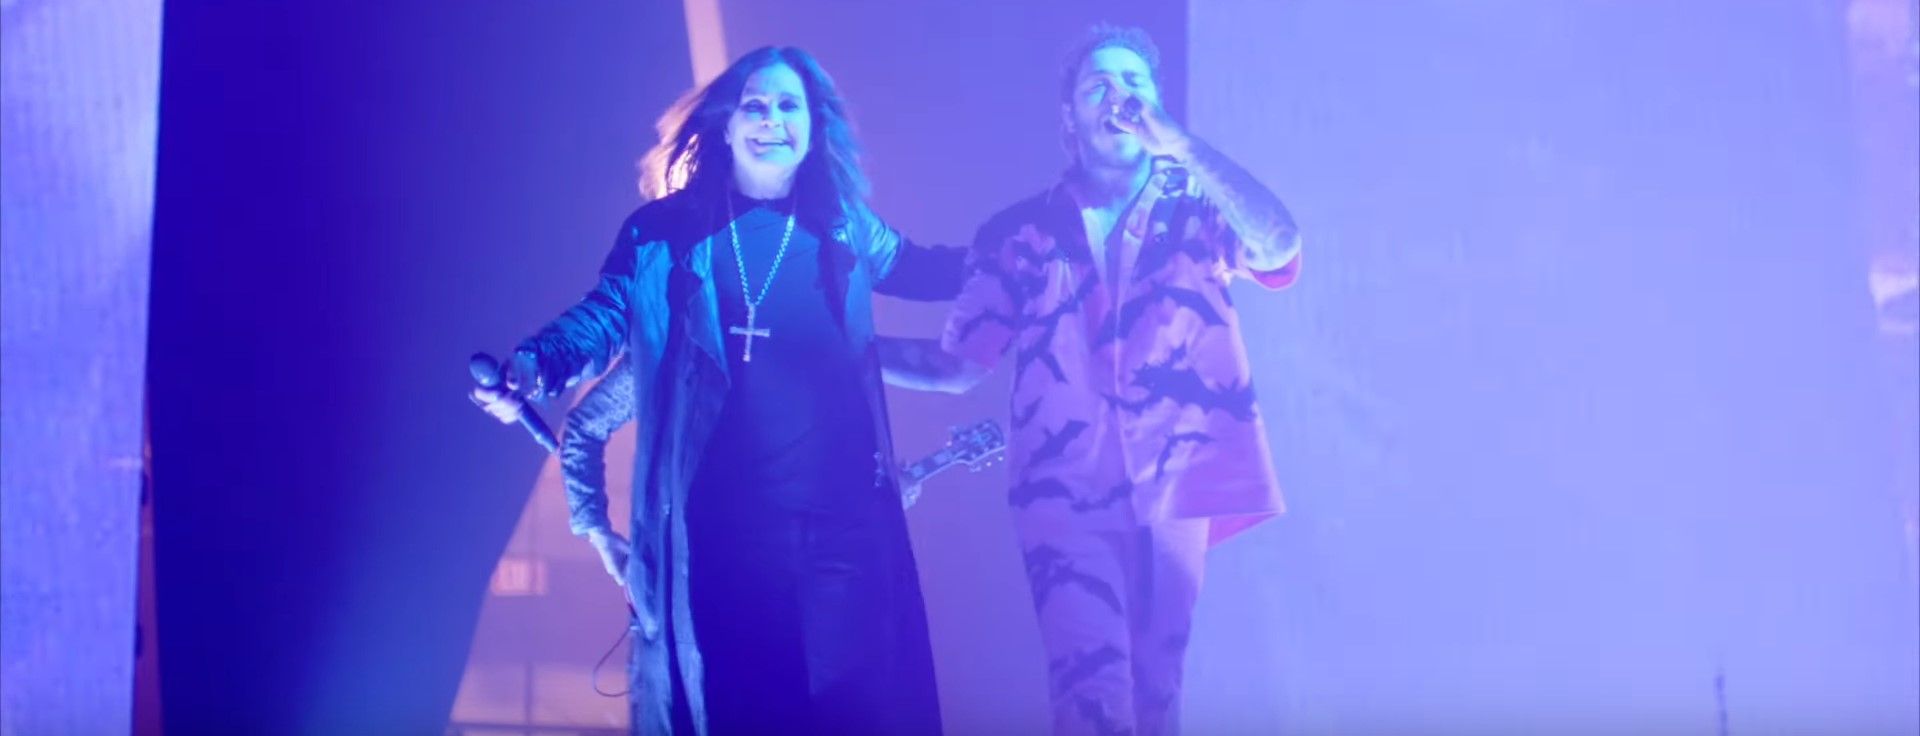 Ozzy Osbourne feat. Post Malone - Take What You Want (Live In California 2019)